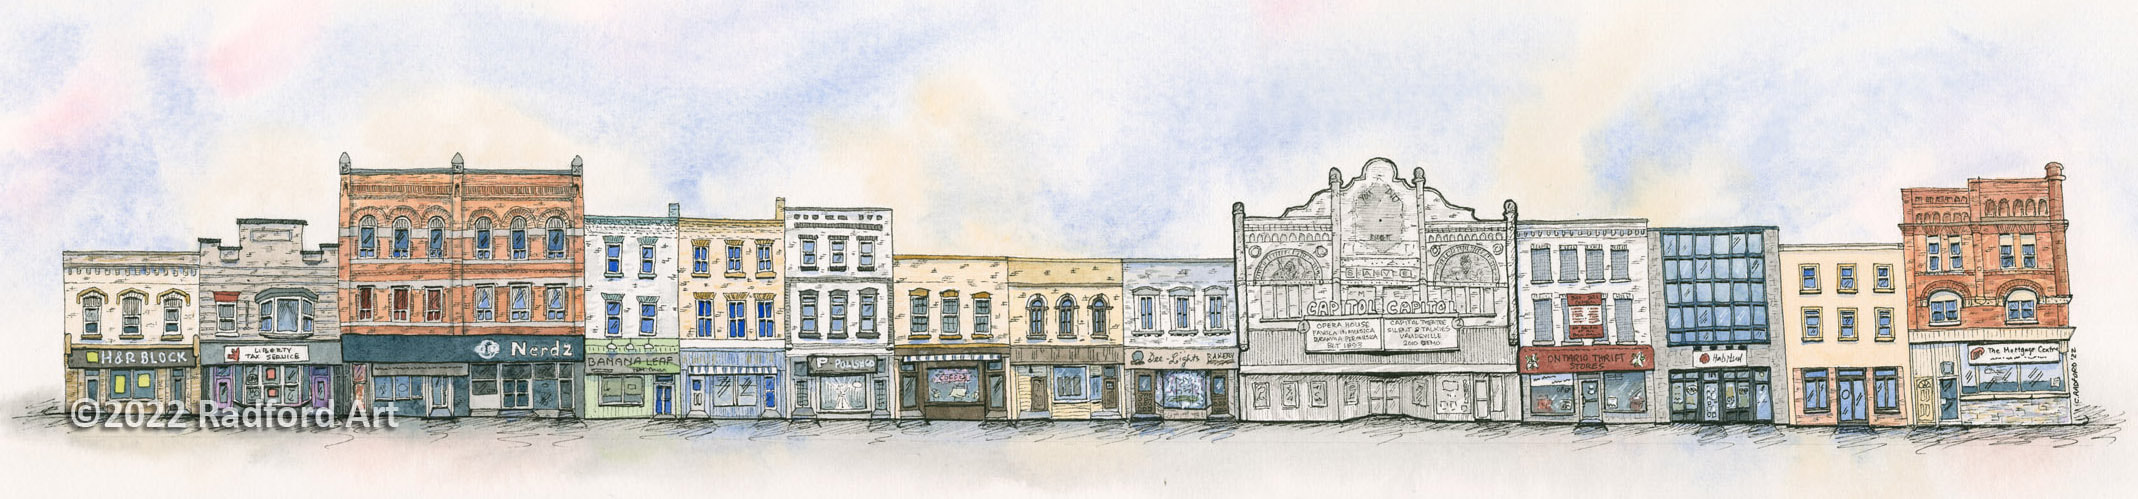 An illustration of Dundas Street in Woodstock Ontario with Capitol Theatre.